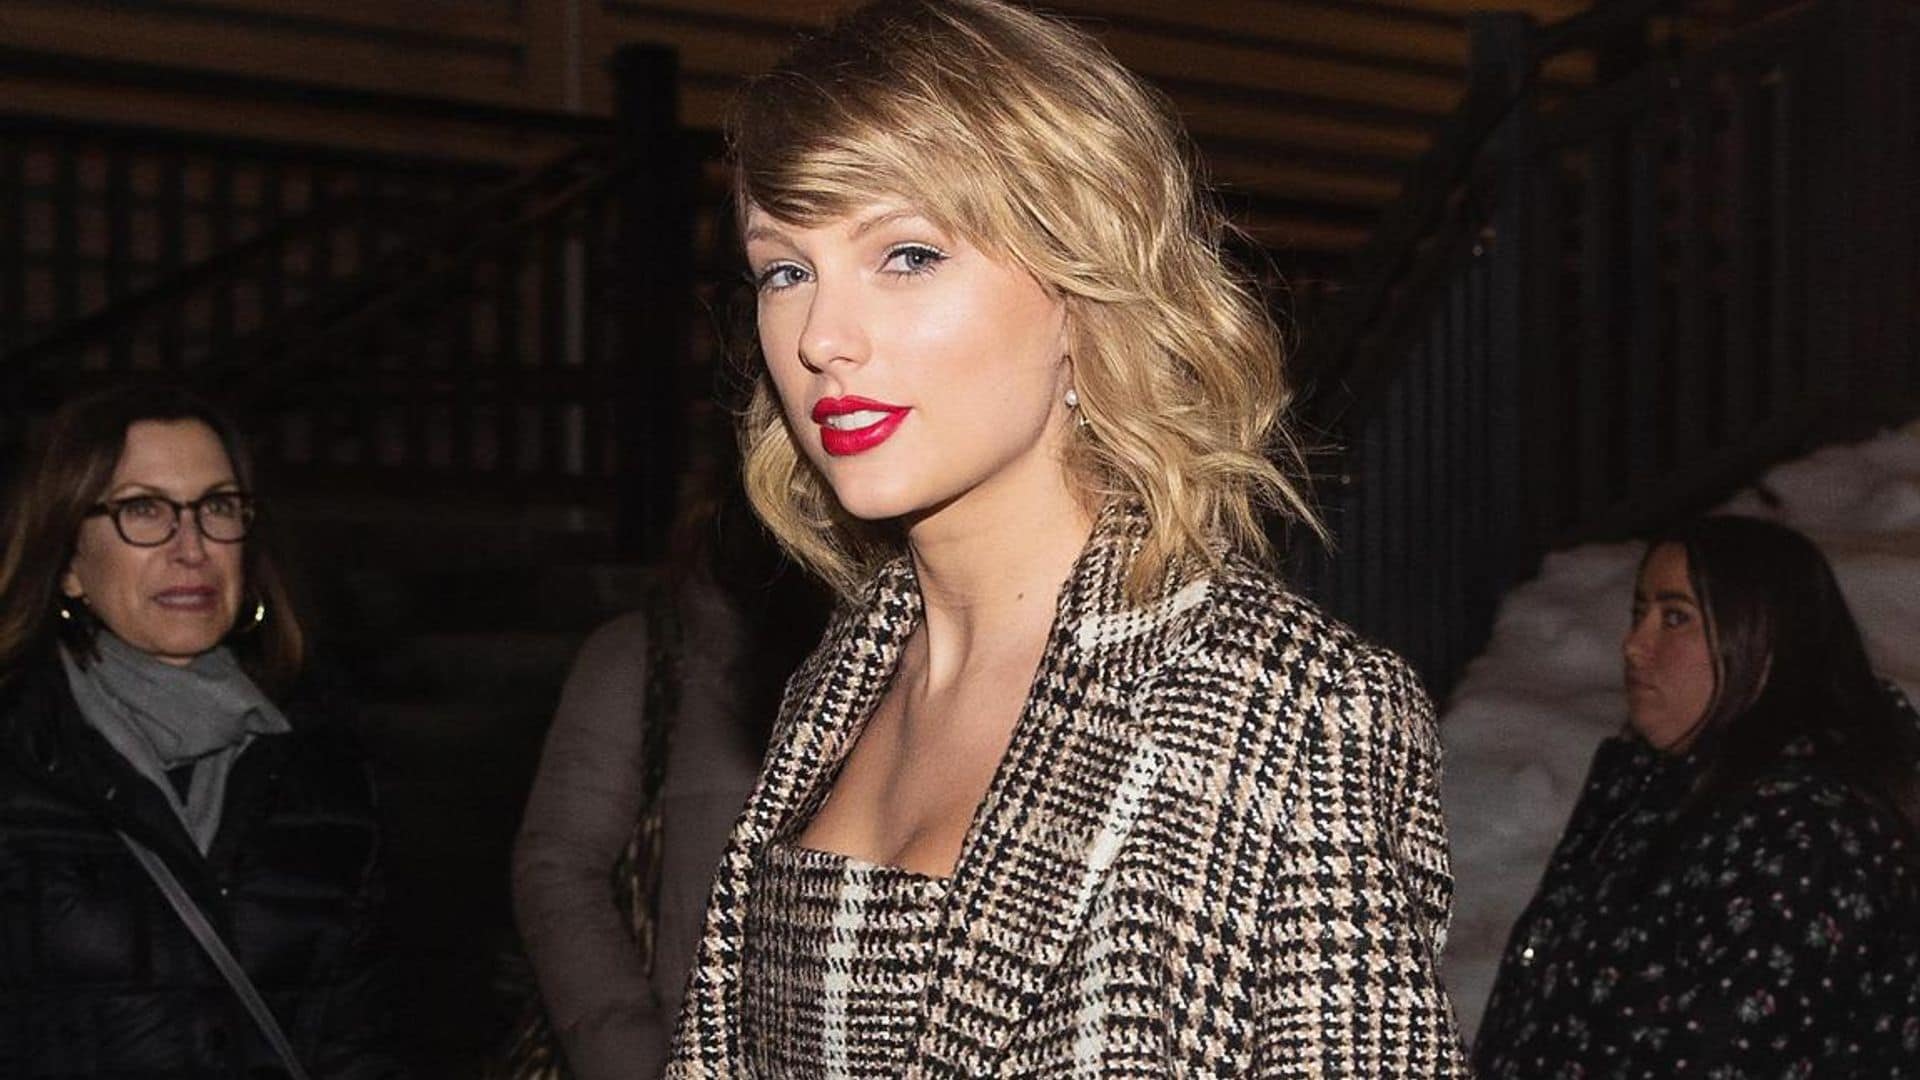 Taylor Swift covers student’s $30,000 tuition fees to study math in the University